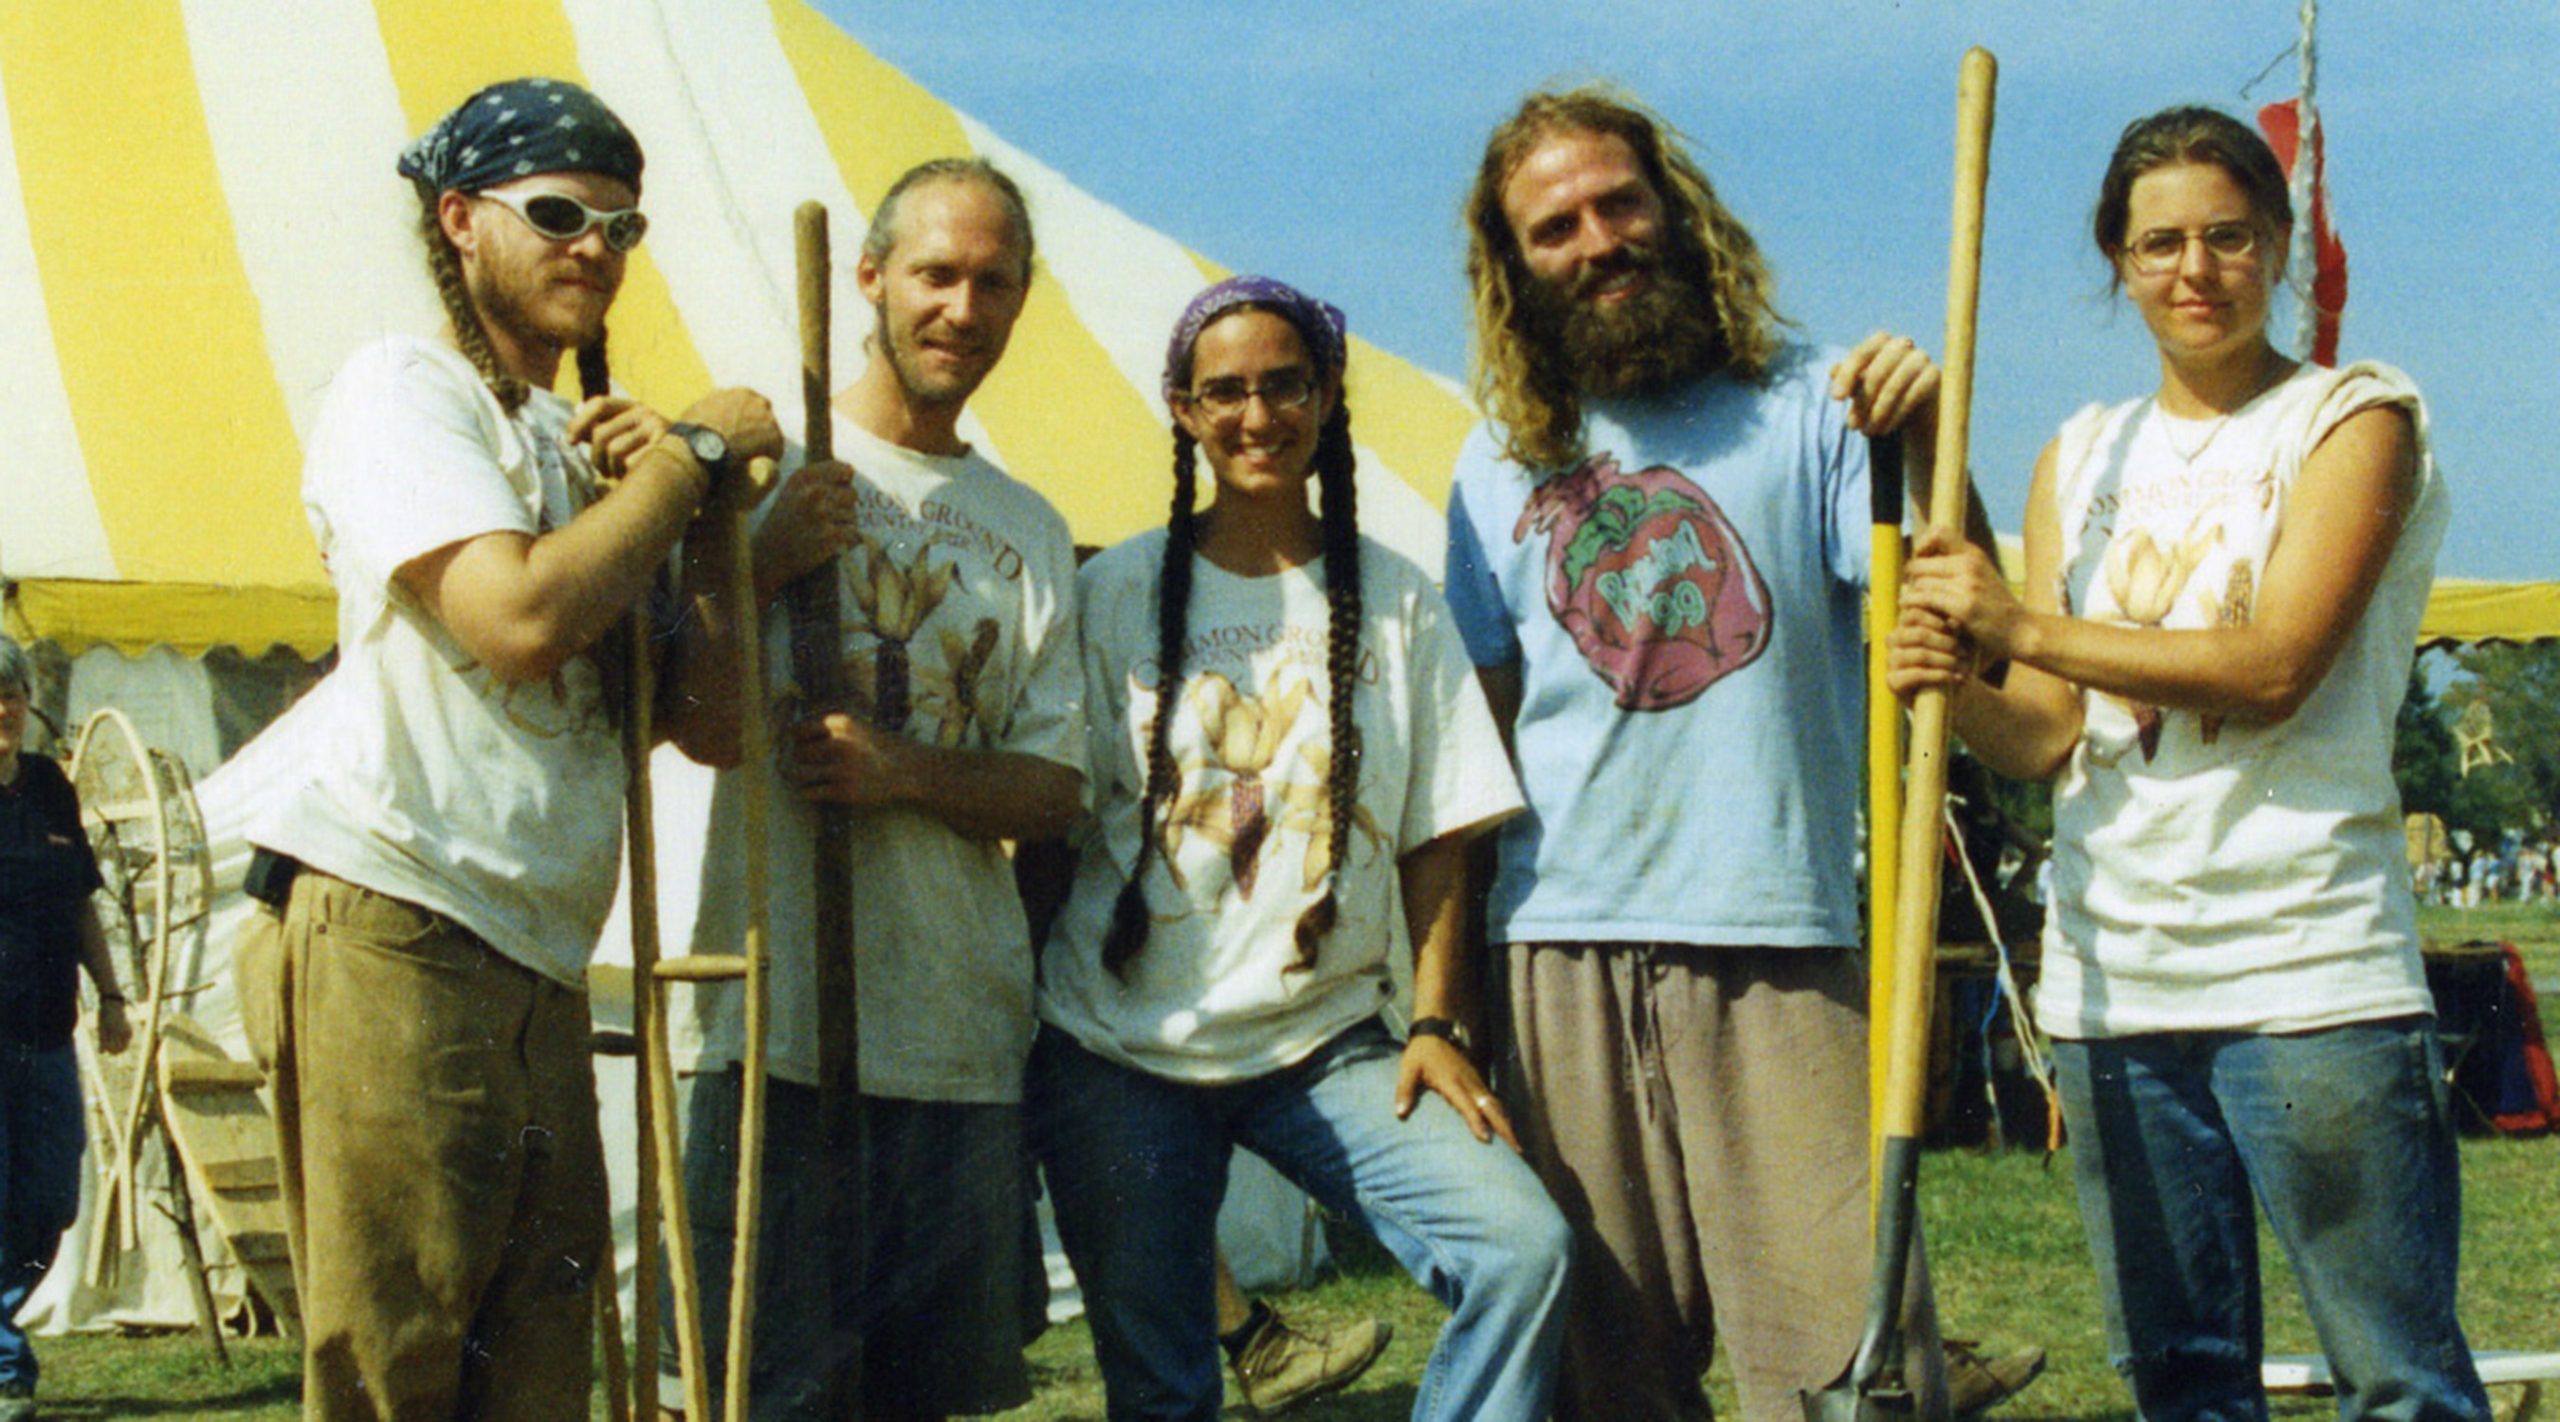 Five people in front of a tent at the Common Ground Fair in Unity, Maine